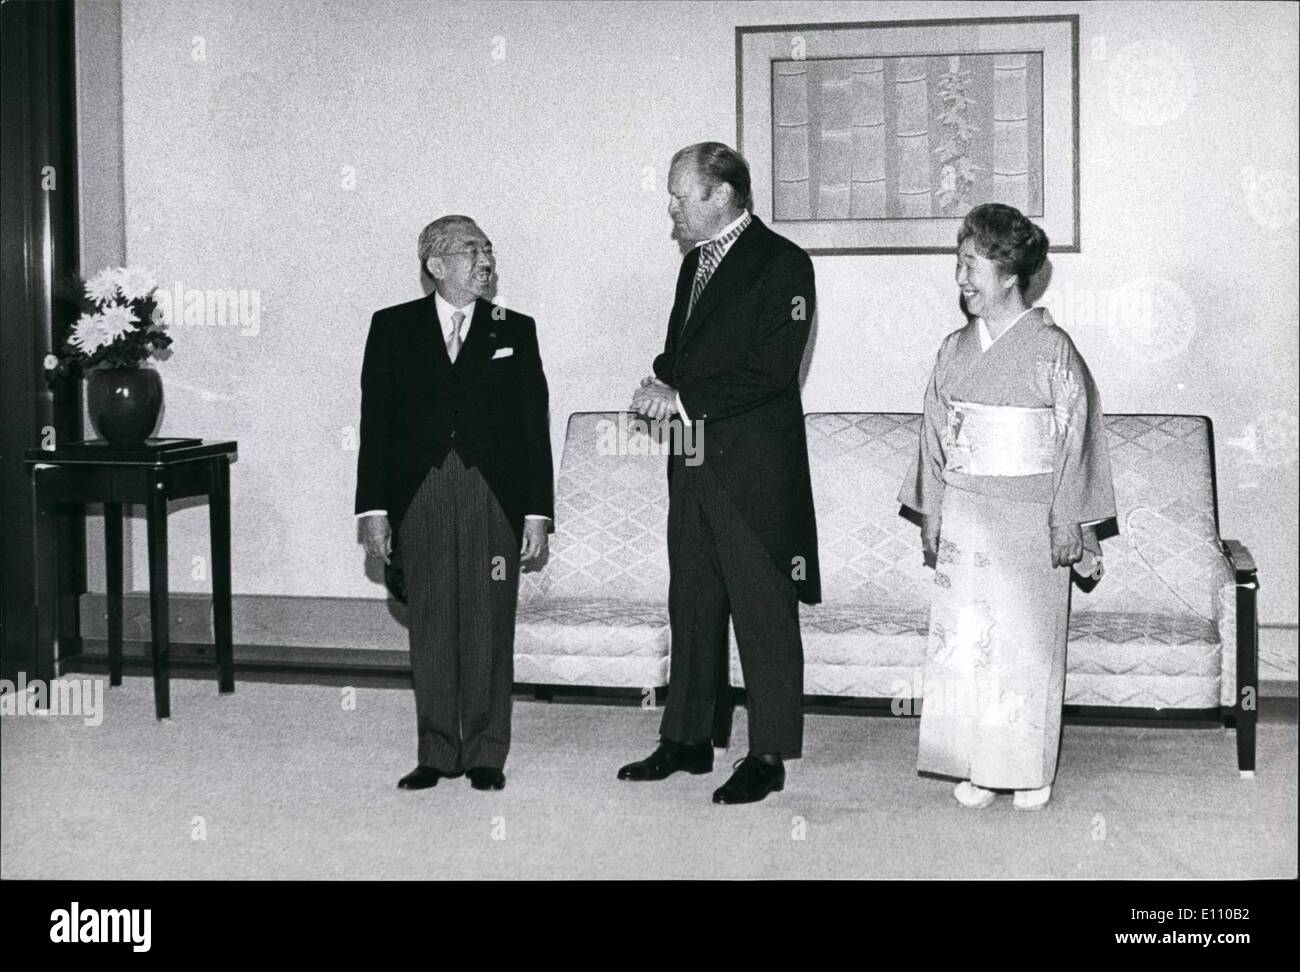 Nov. 11, 1974 - President Ford Visits Japan: President Gerald Ford is received by Emperor Hirohito and Empress Negato art the Imperial Palace in Tokyo, soon after his arrival in Tokyo. He is the first U.S. President in office to visit Japan. Stock Photo